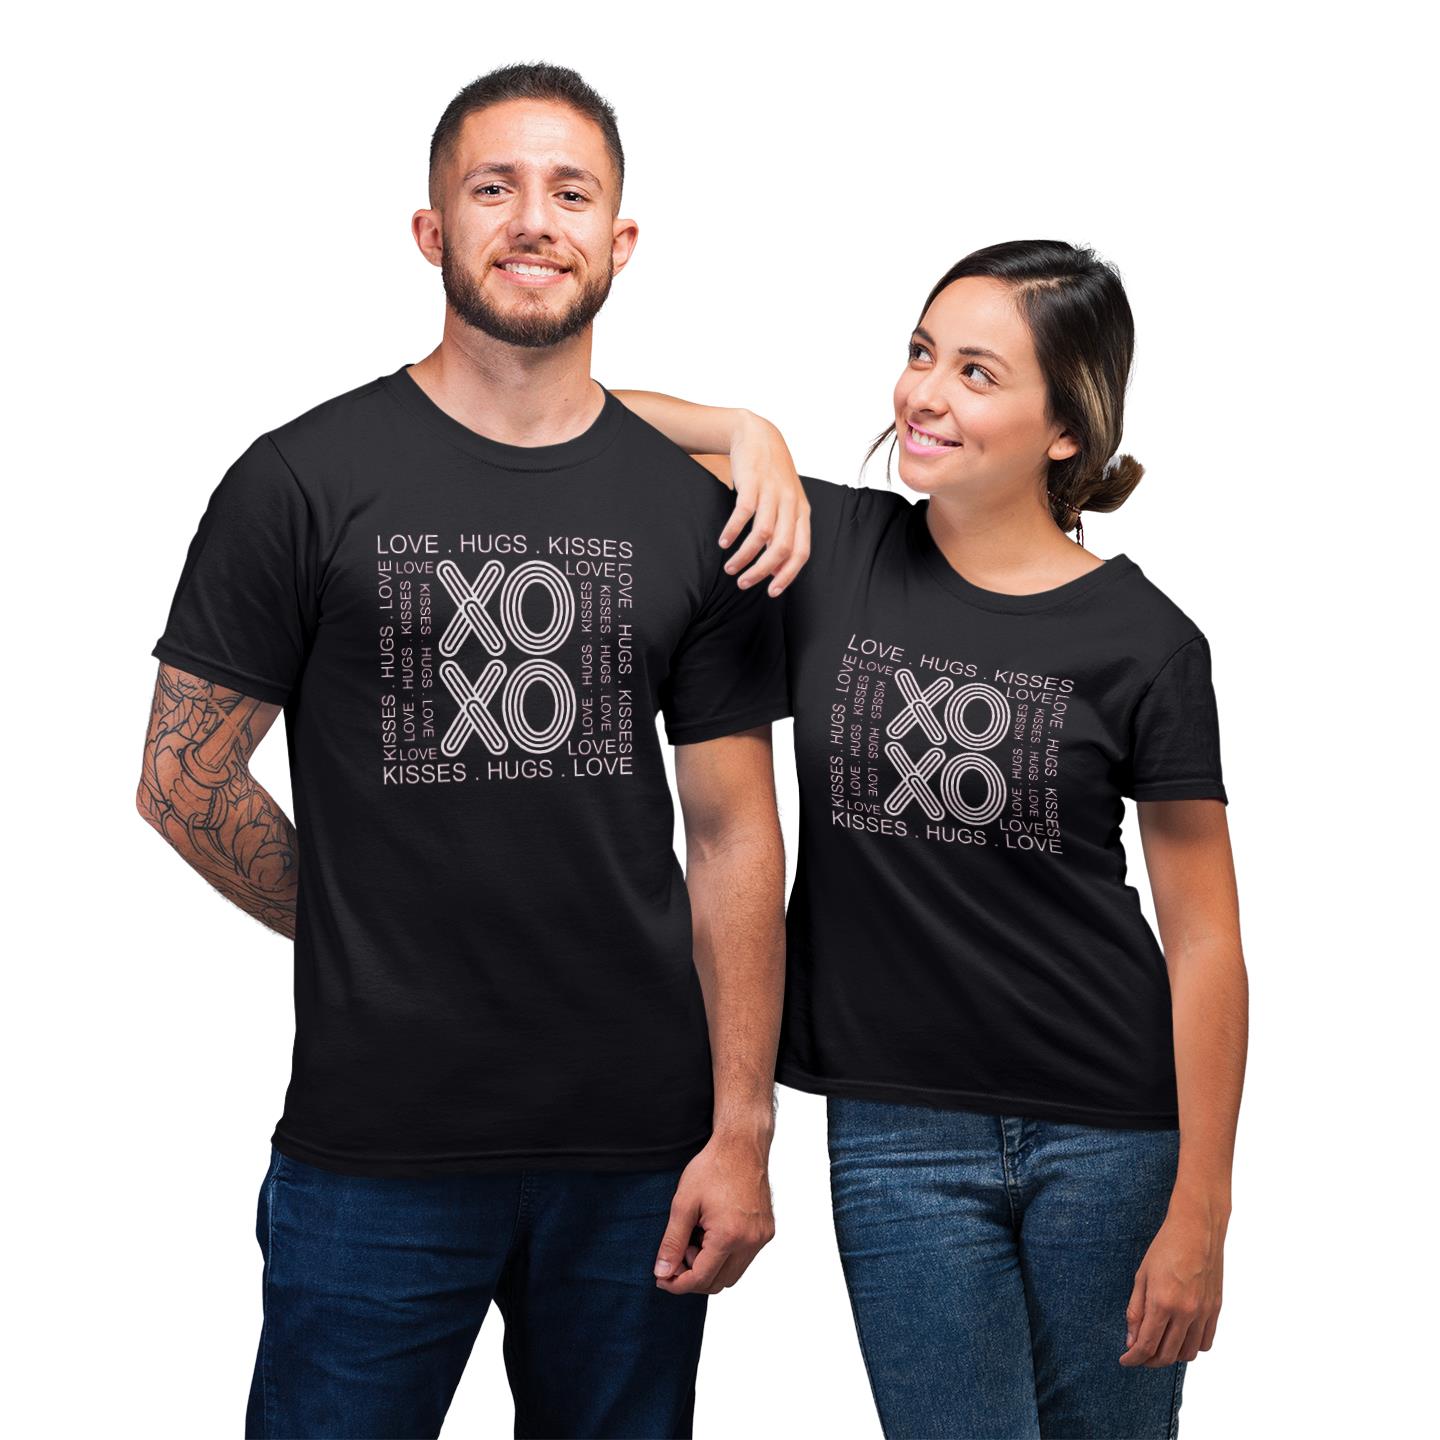 Love Hugs Kissed XOXO Shirts For Couples Lover Matching T-shirt